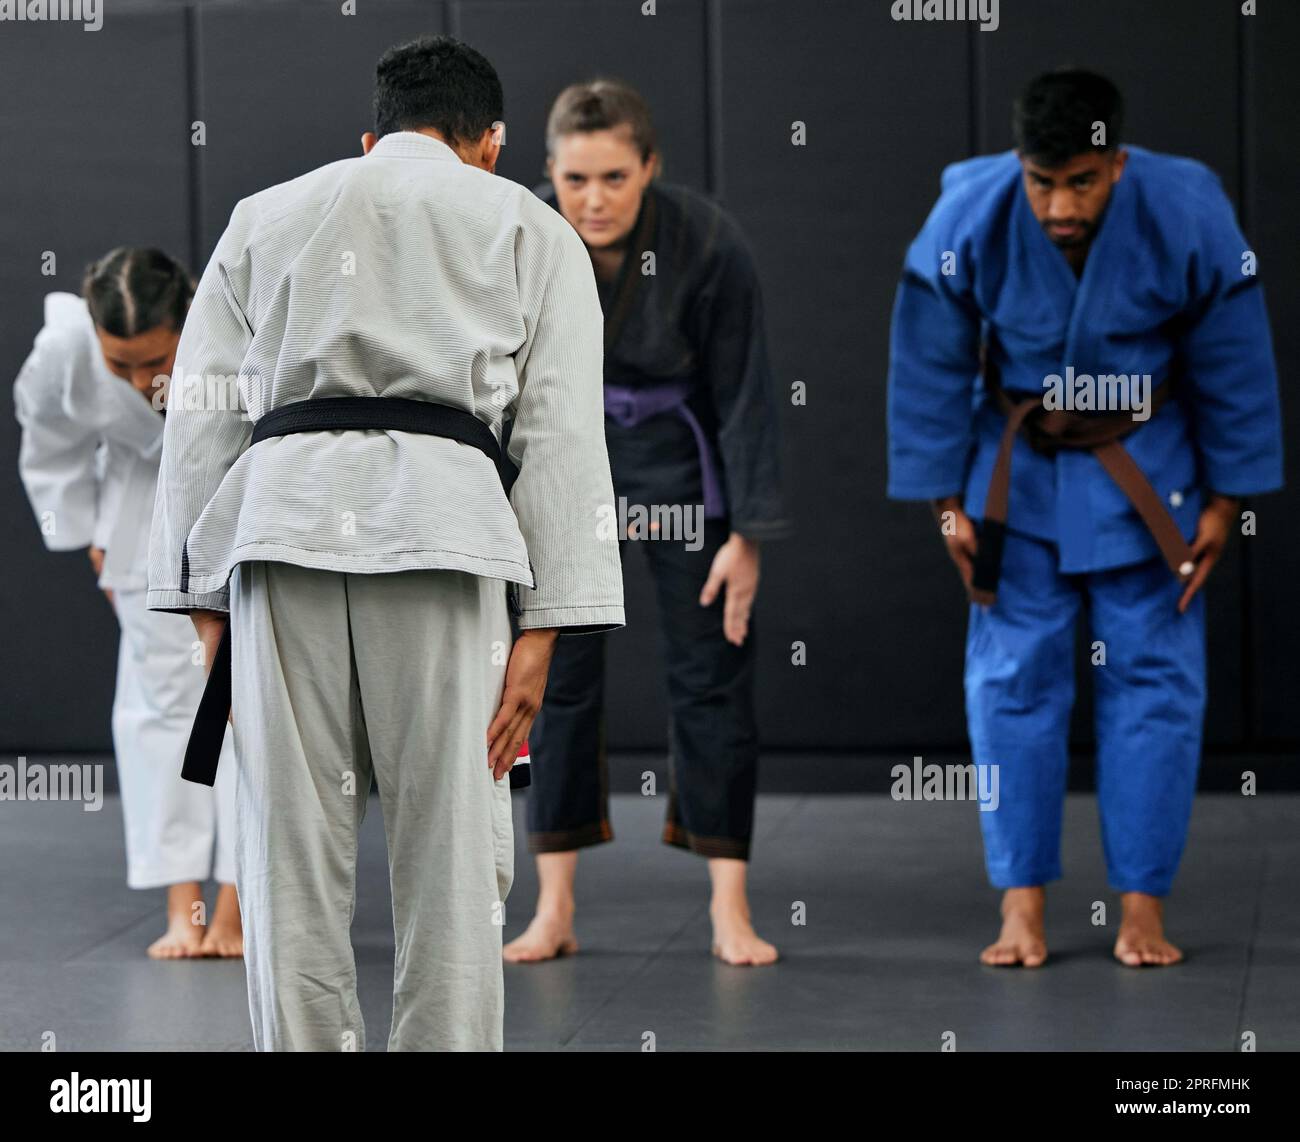 Fitness, strength and respect between karate trainer leading a class, bow and greeting martial arts student at a dojo or studio. Diverse group training and learning self defense and endurance skills Stock Photo